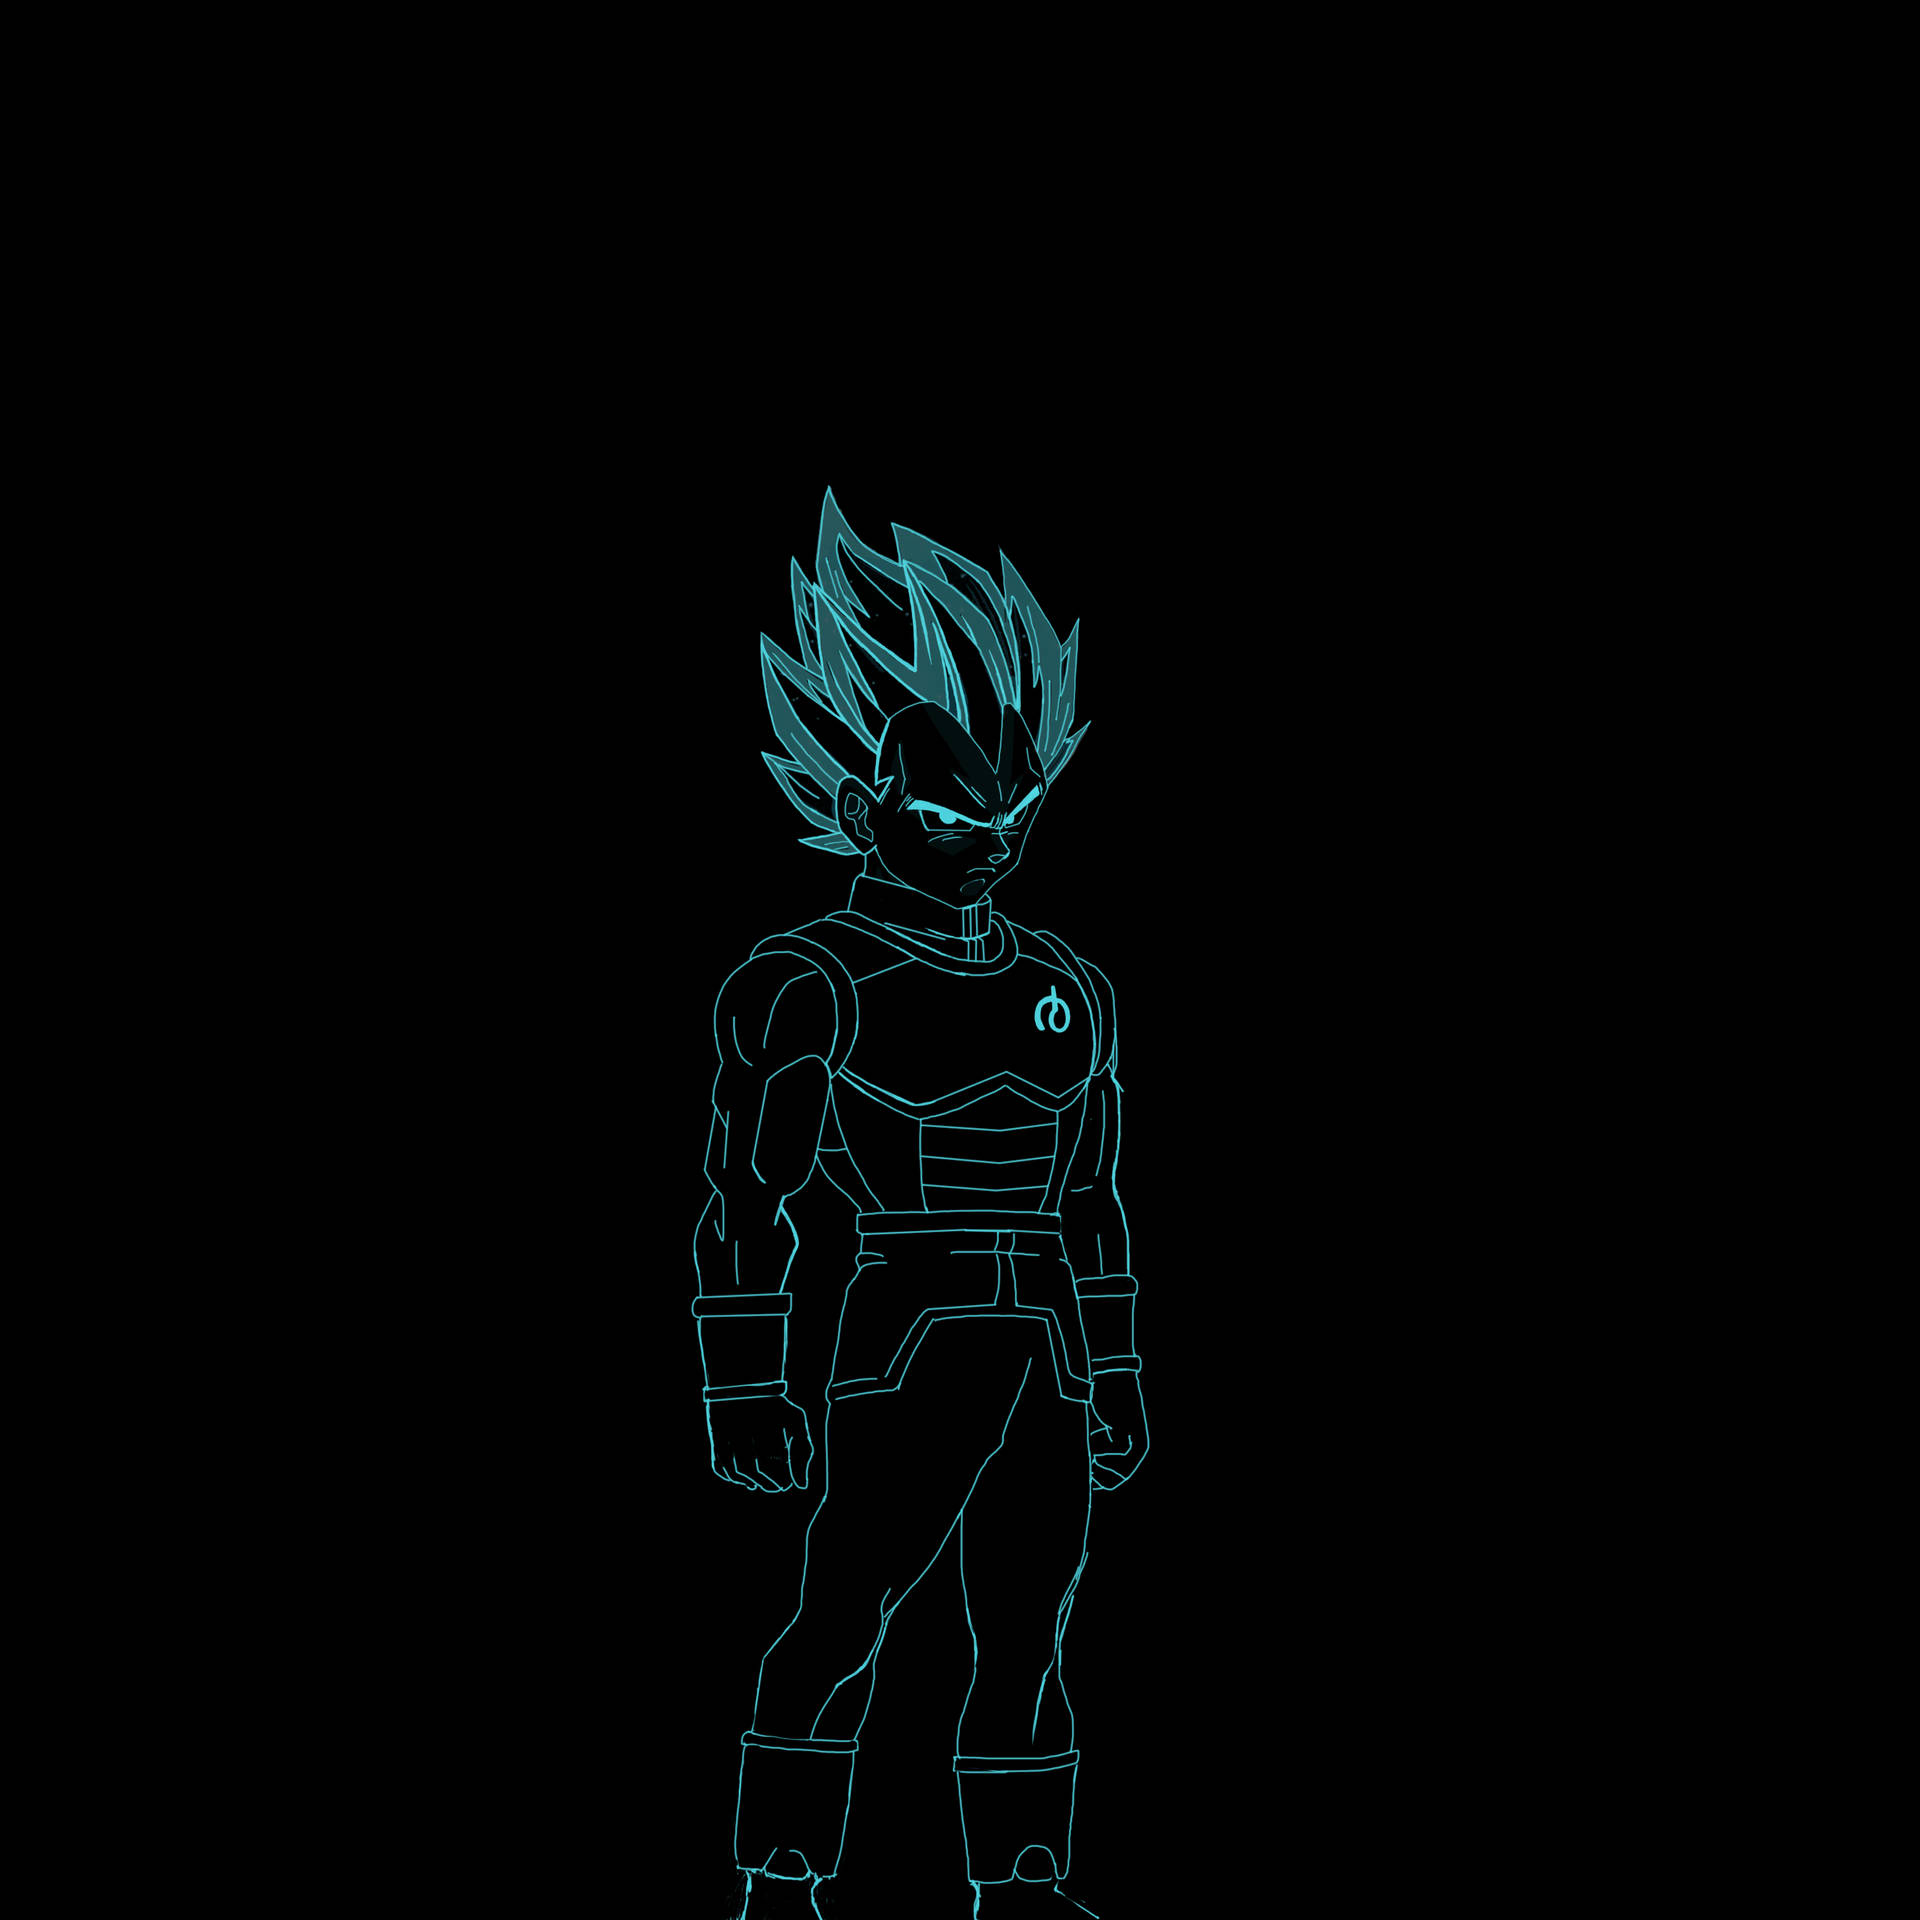 Uncover the powerful Dark Vegeta side of yourself Wallpaper